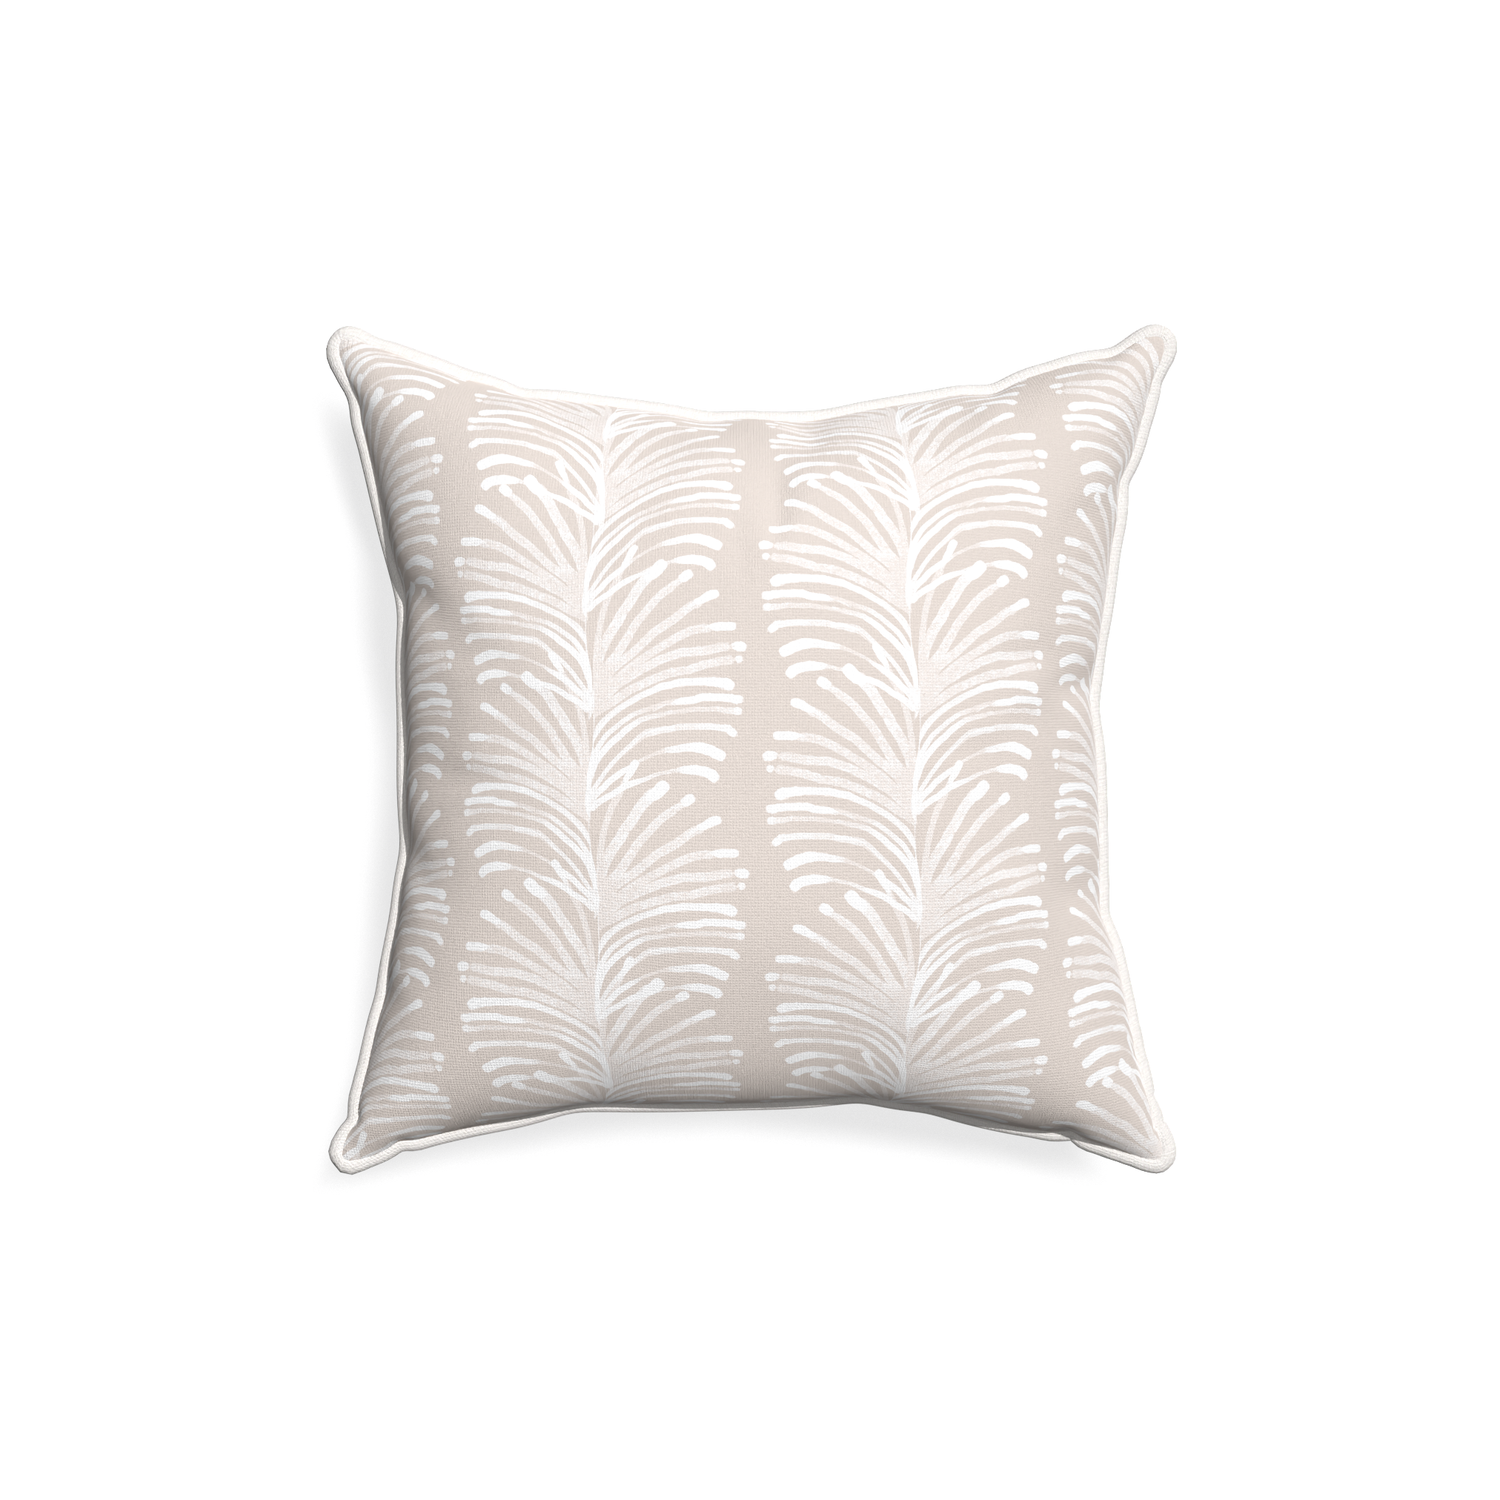 18-square emma sand custom sand colored botanical stripepillow with snow piping on white background